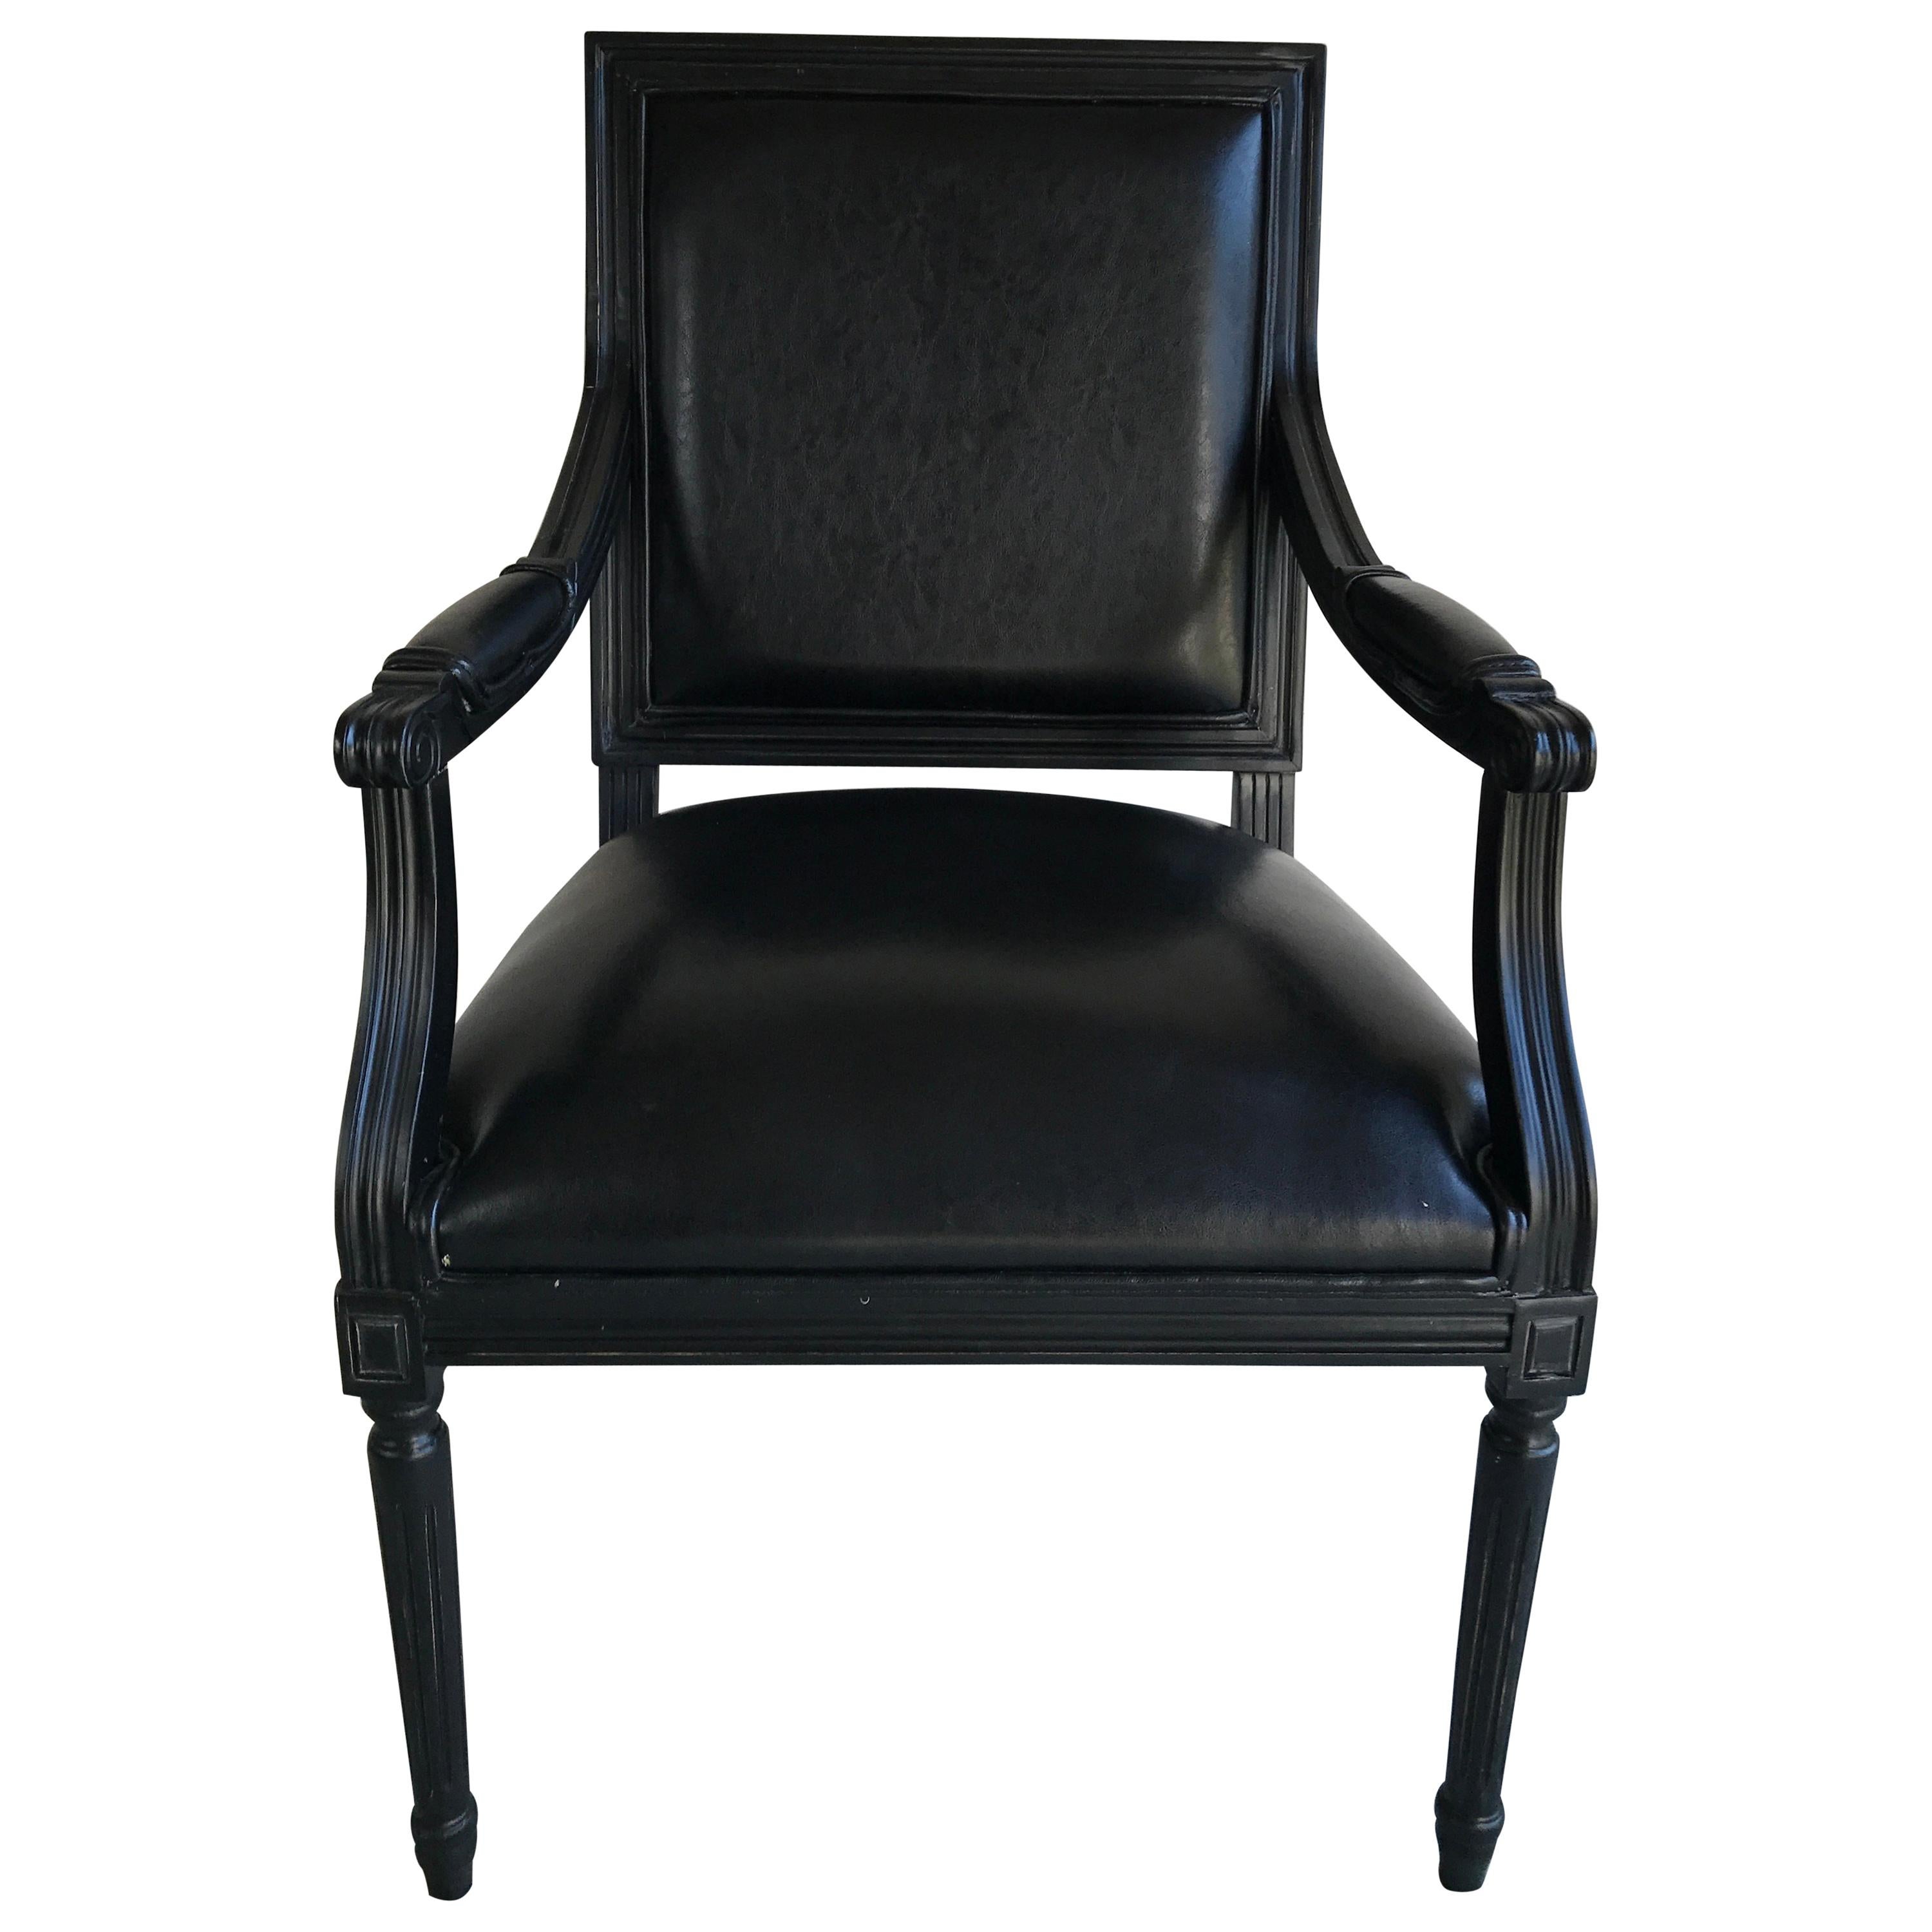 A pair of black painted Directoire style armchairs with black leatherette upholstery. Wonderful square design with a monochromatic finish.